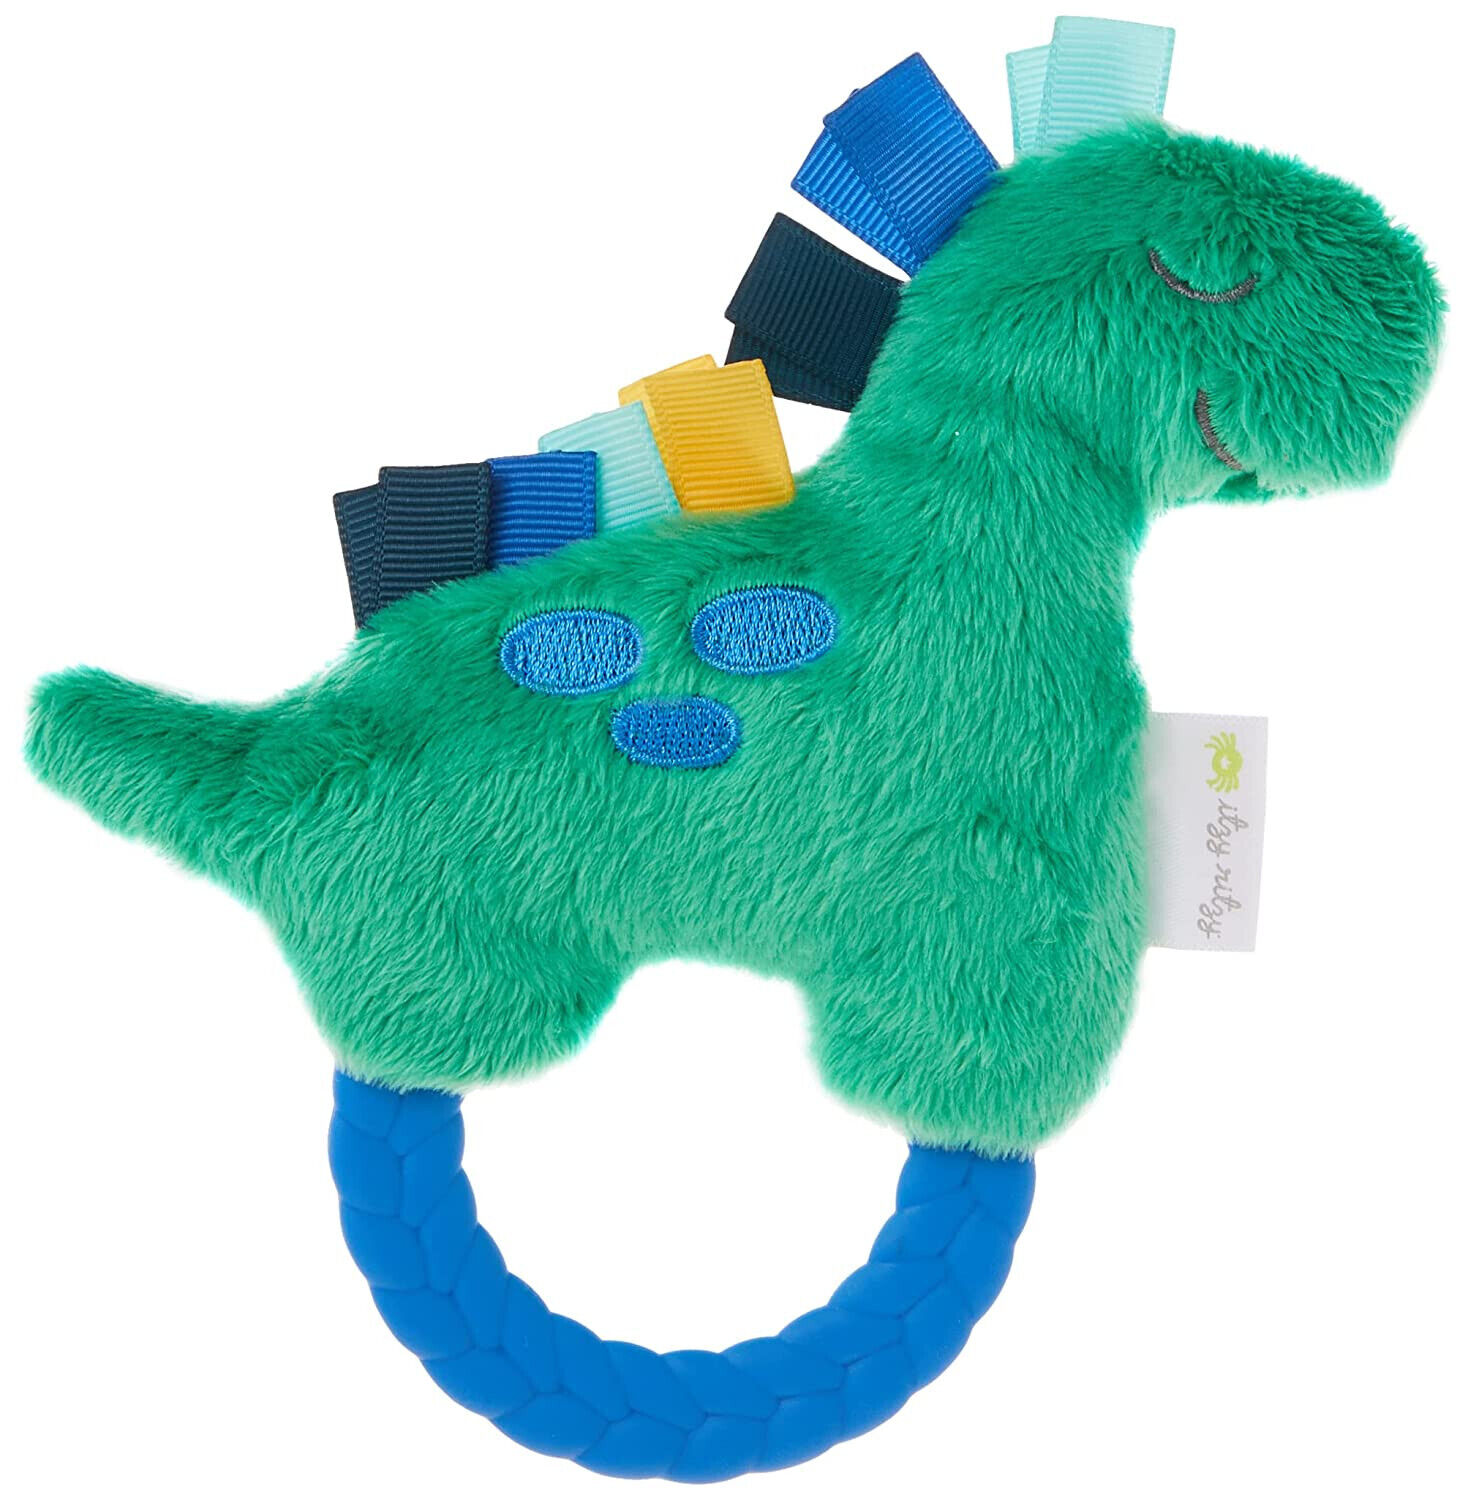 Itzy Ritzy Plush Rattle Pal With Teether Green Dino Dinosaur